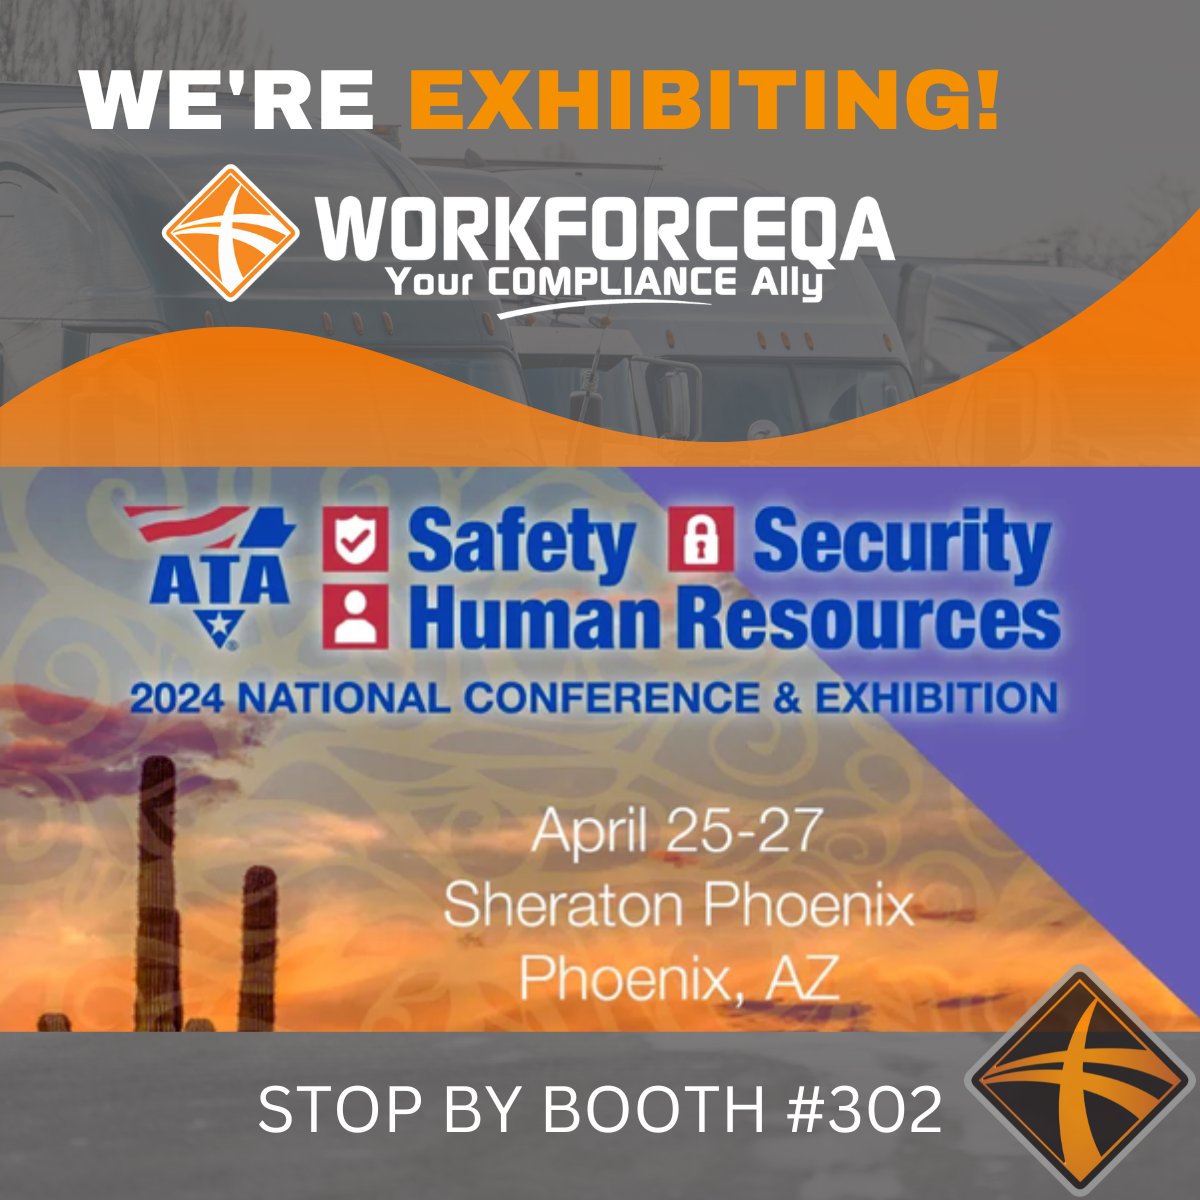 Visit WFQA at Booth 302 in the ATA Safety, Security & Human Resources (SSHR) Conference in Phoenix from April 25-27!  #trucking #drugtesting #backgroundscreening #SSHR24 #safety #compliancemanagement wfqa.com